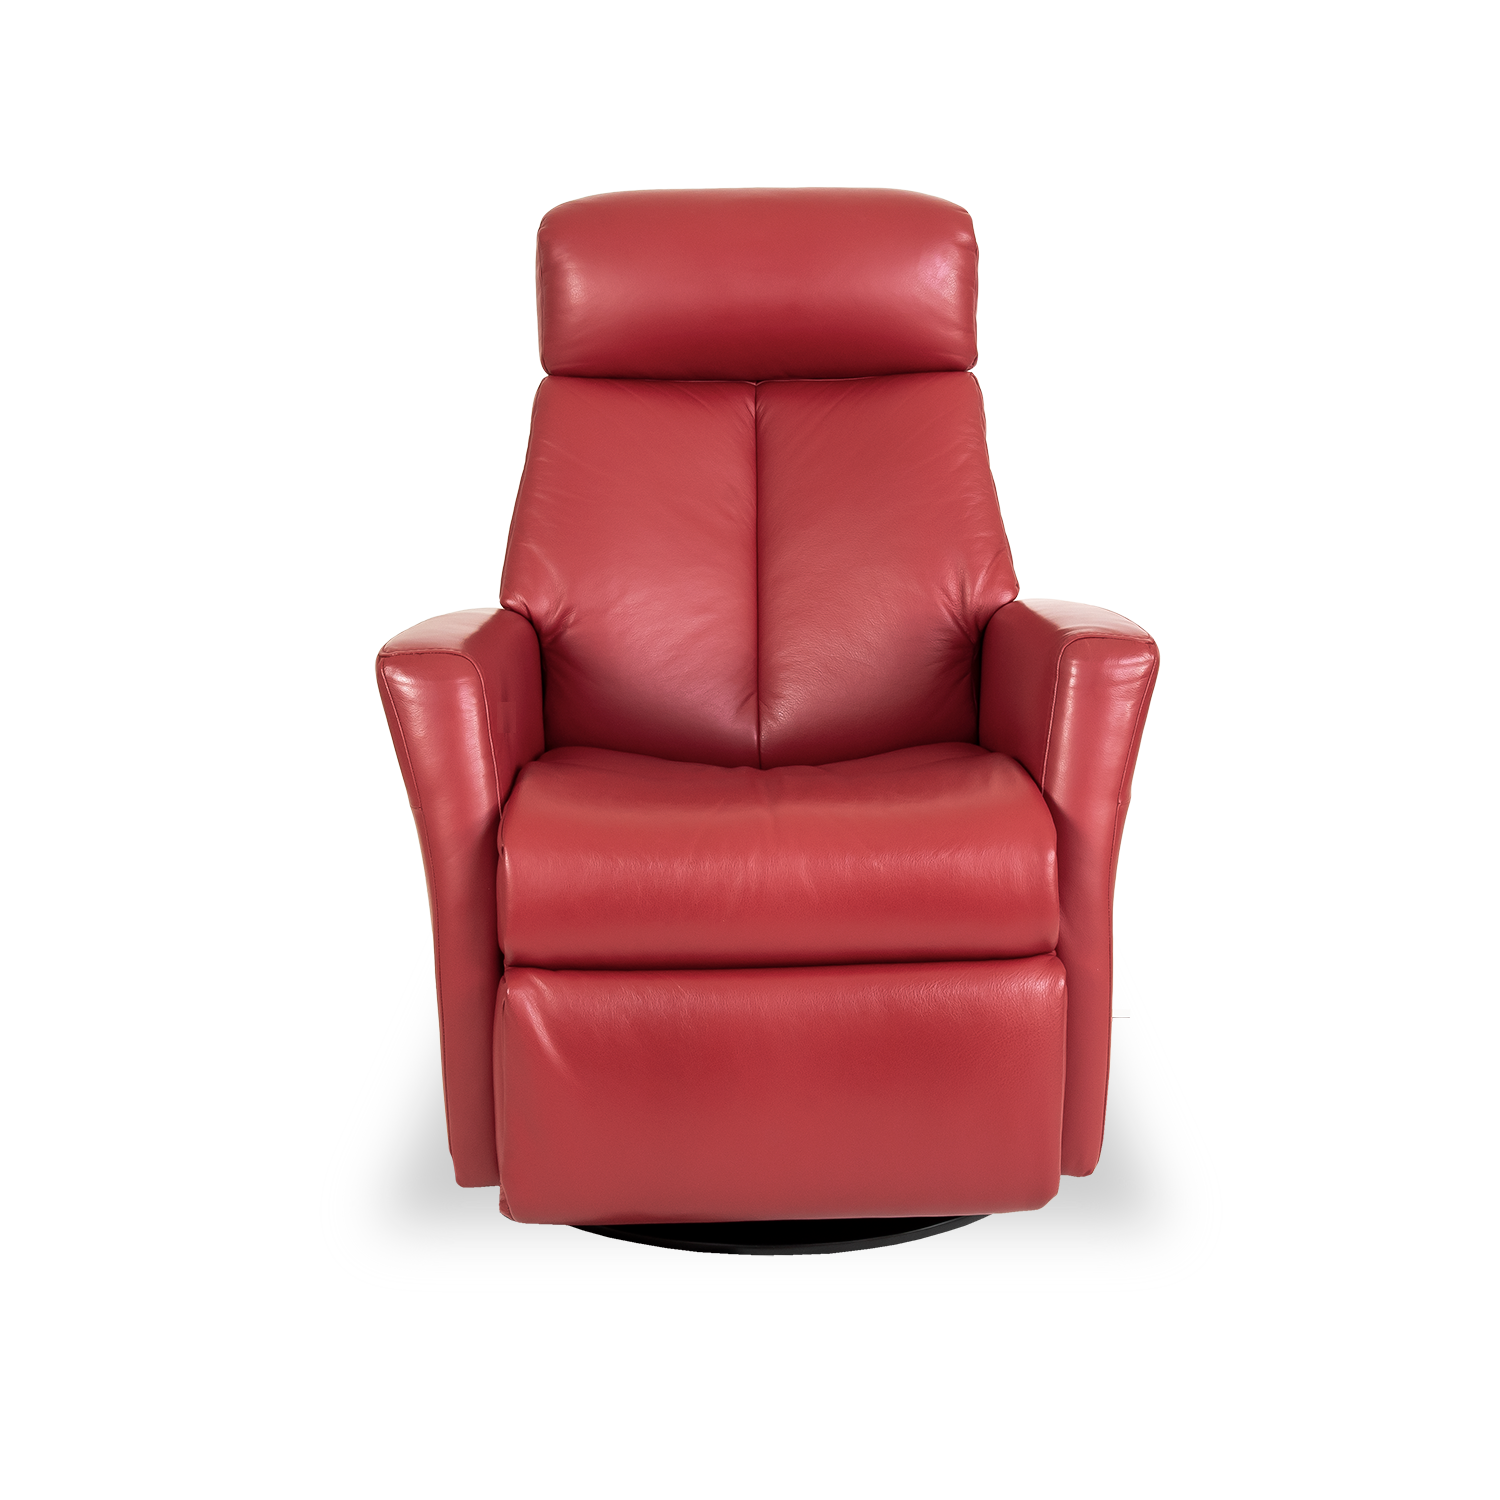 Southern Motion Contour Leather Power Recliner - Wayfair Canada